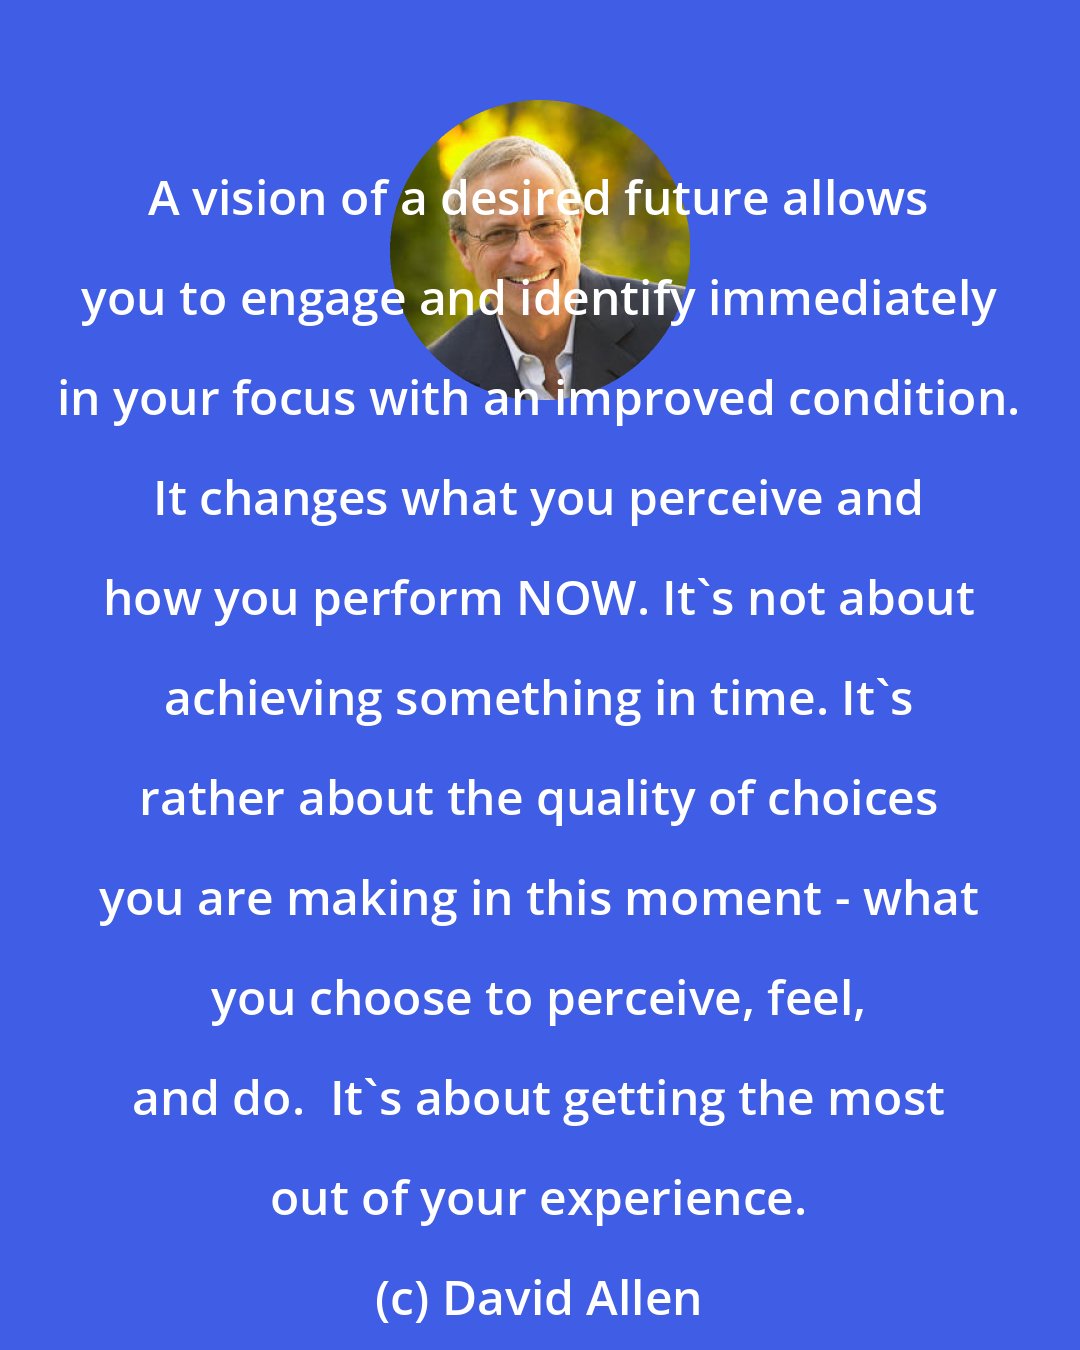 David Allen: A vision of a desired future allows you to engage and identify immediately in your focus with an improved condition. It changes what you perceive and how you perform NOW. It's not about achieving something in time. It's rather about the quality of choices you are making in this moment - what you choose to perceive, feel, and do.  It's about getting the most out of your experience.